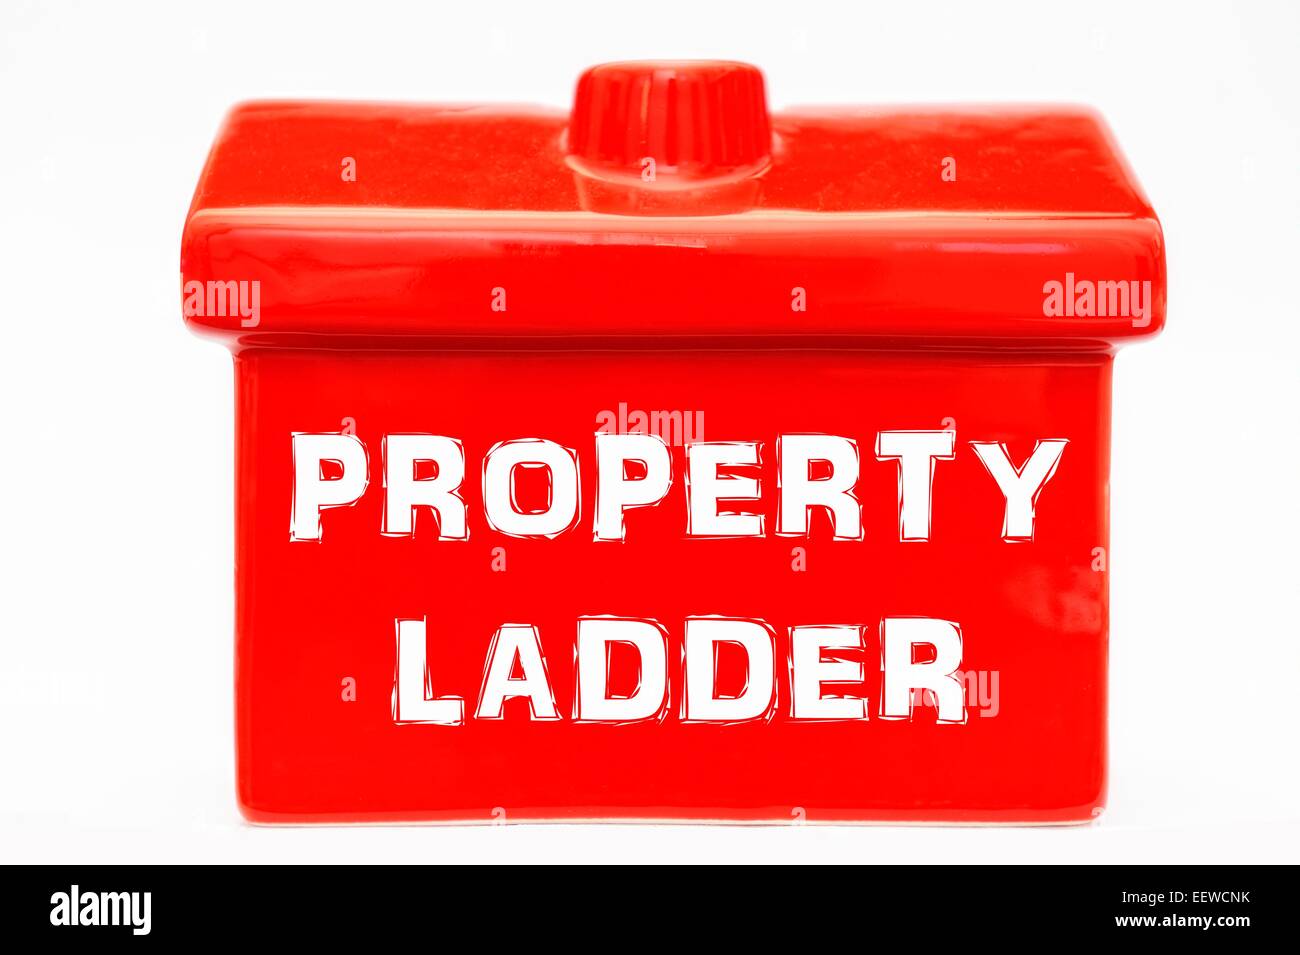 Property ladder on a red house Stock Photo